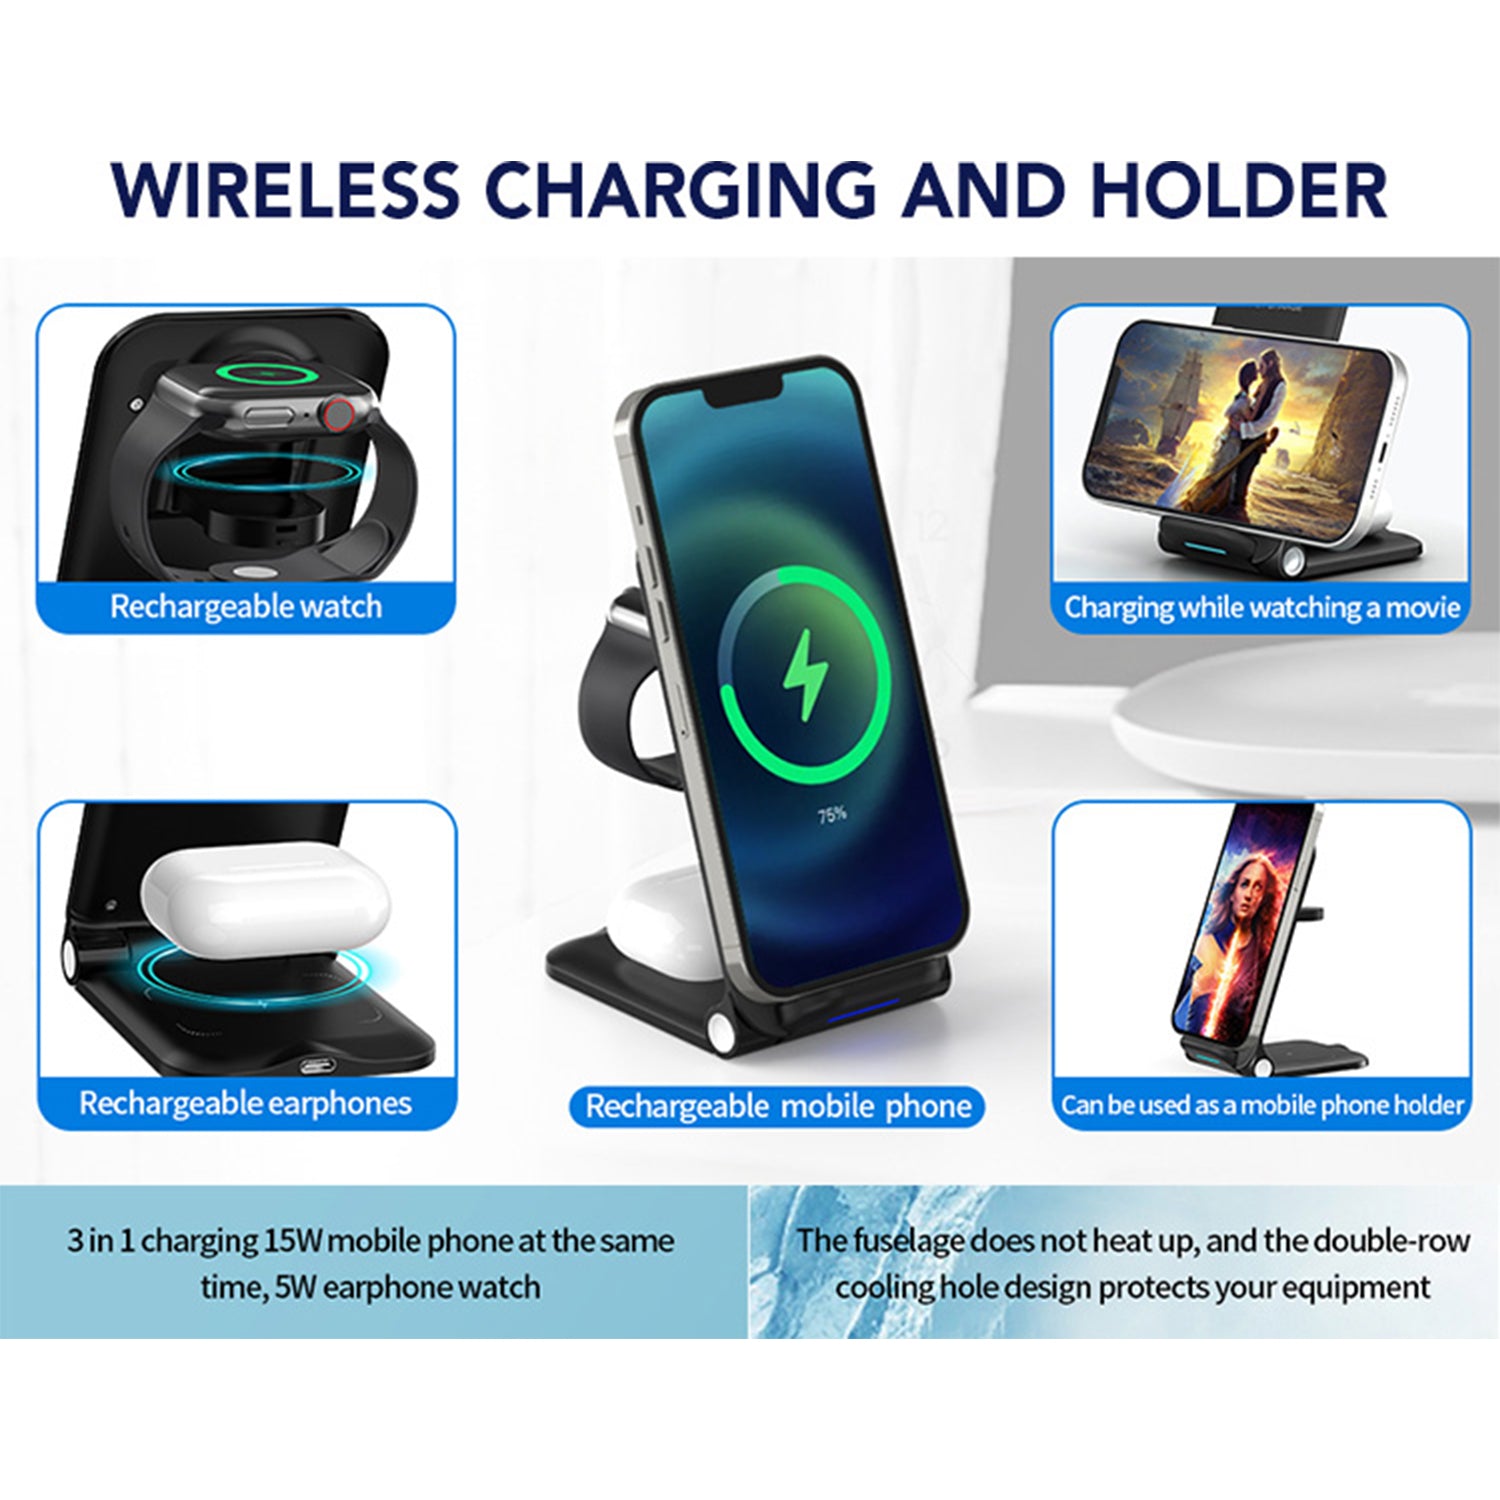 15 W 3 in 1 Wireless Fast Charger - Universal Compatibility, Foldable & Portable Design